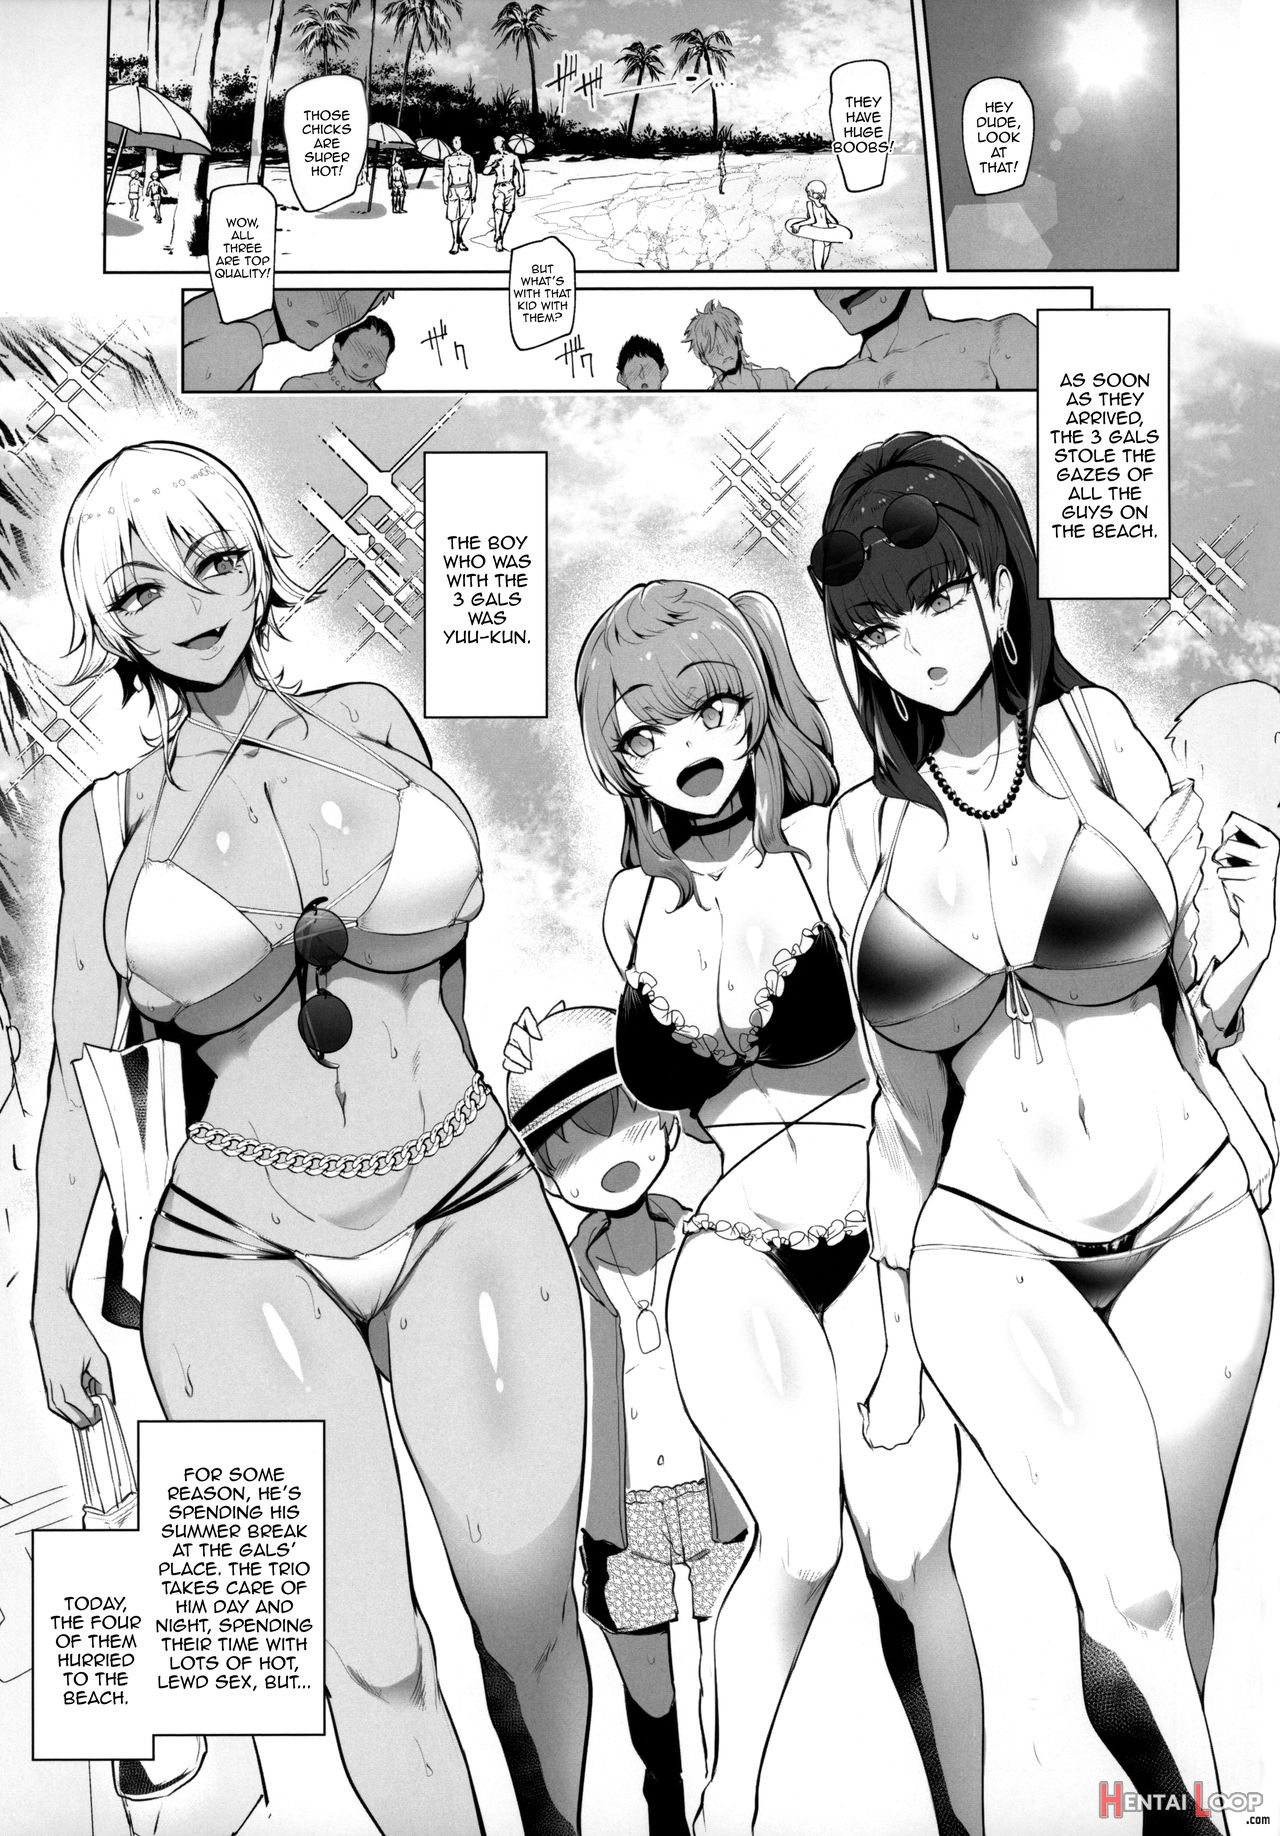 Visiting The Beach With The Lewd Gal Onee-sans page 3